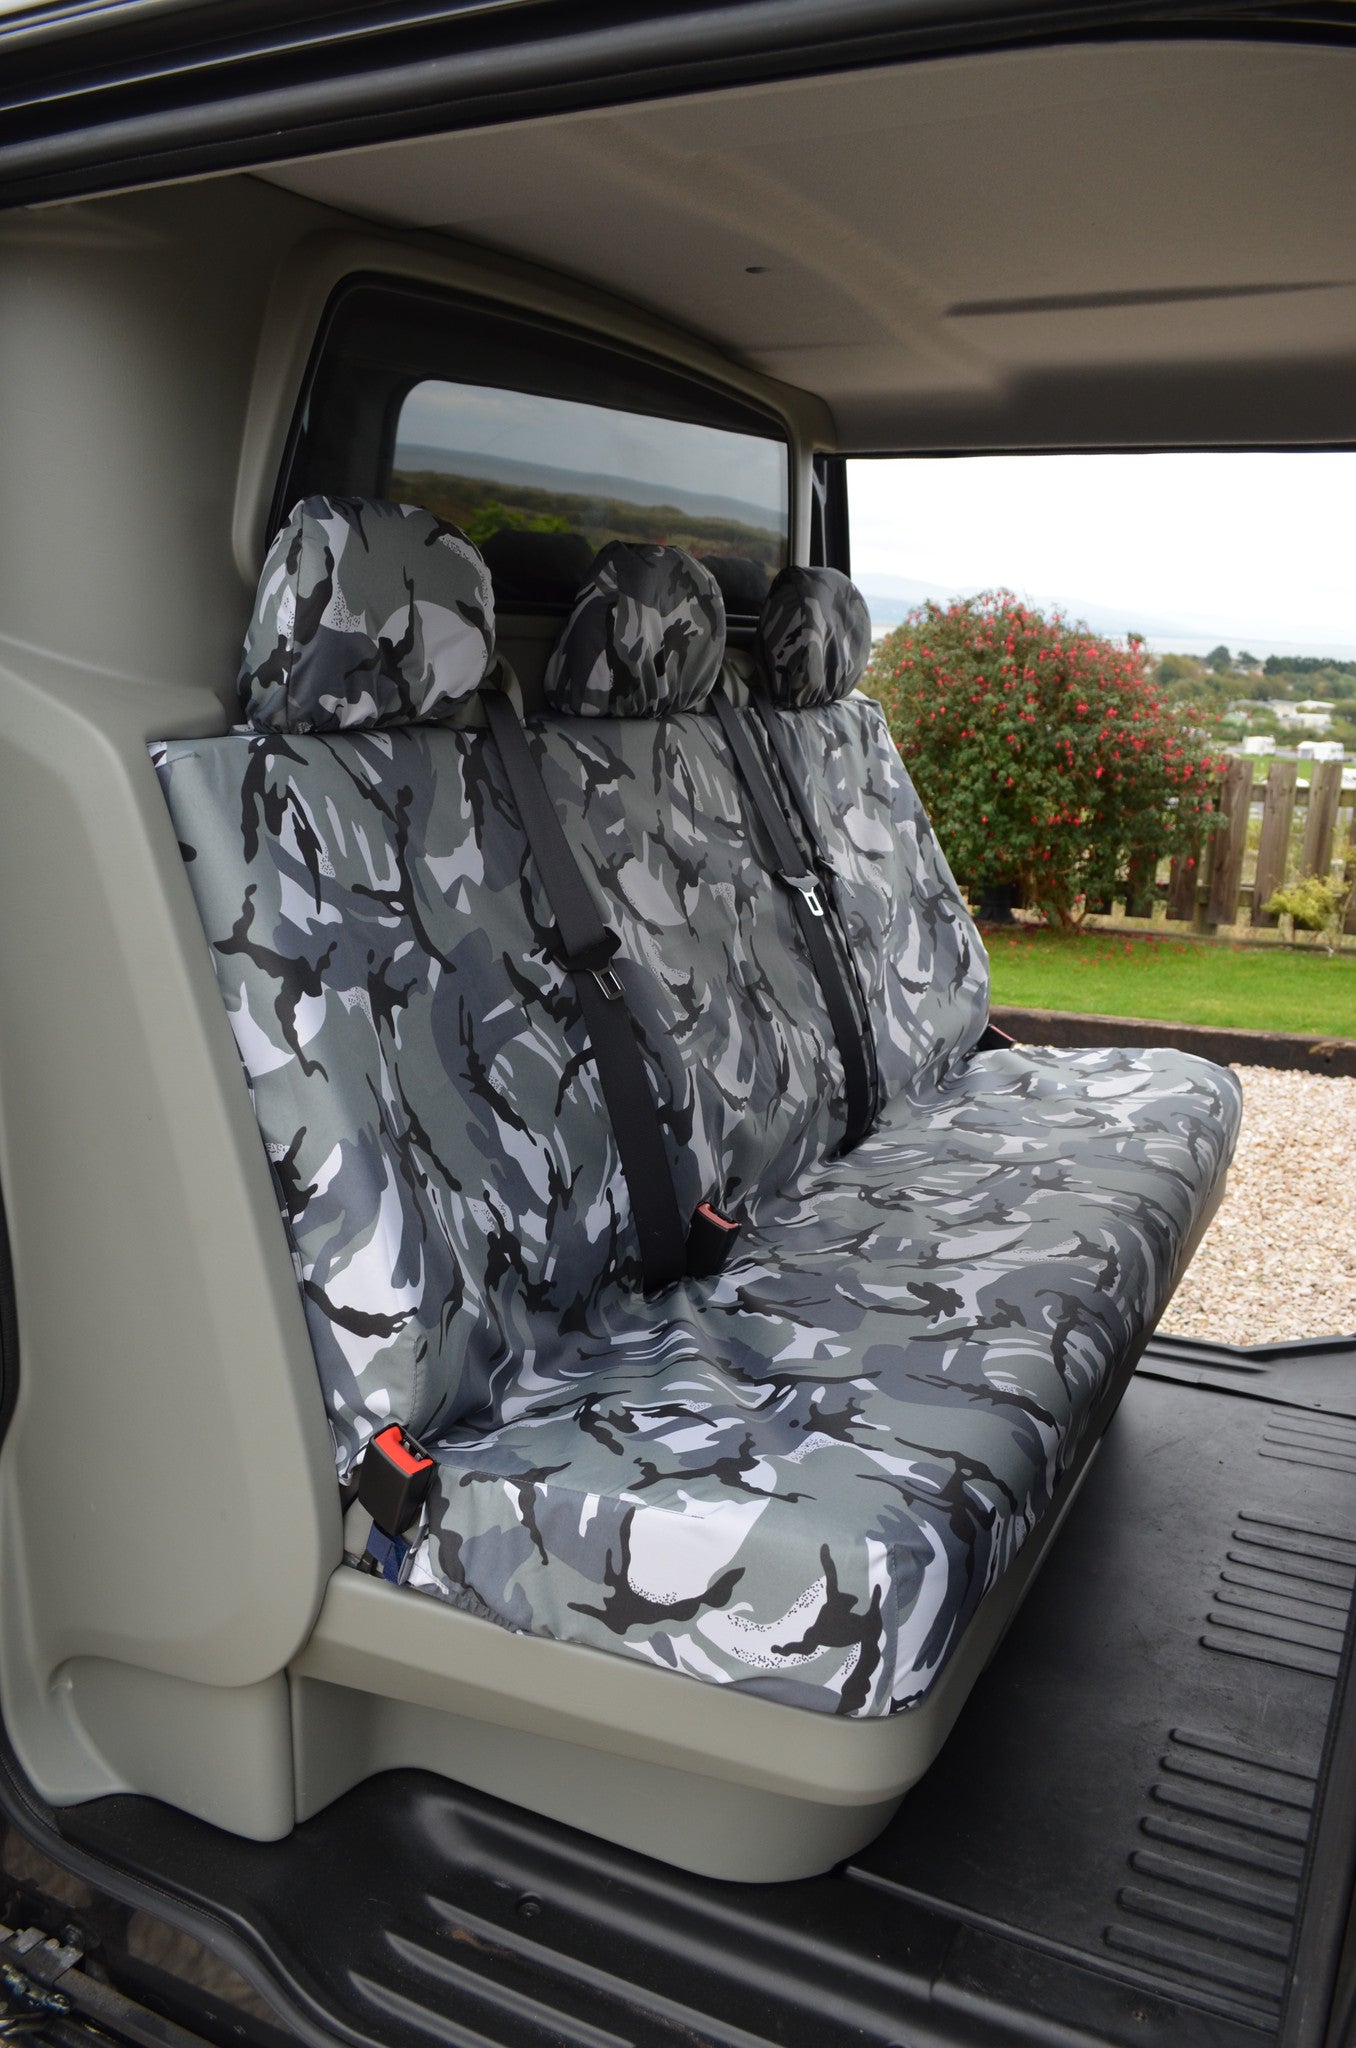 Nissan Primastar Crew Cab 2002 - 2006 Rear Seat Covers Grey Camouflage Turtle Covers Ltd